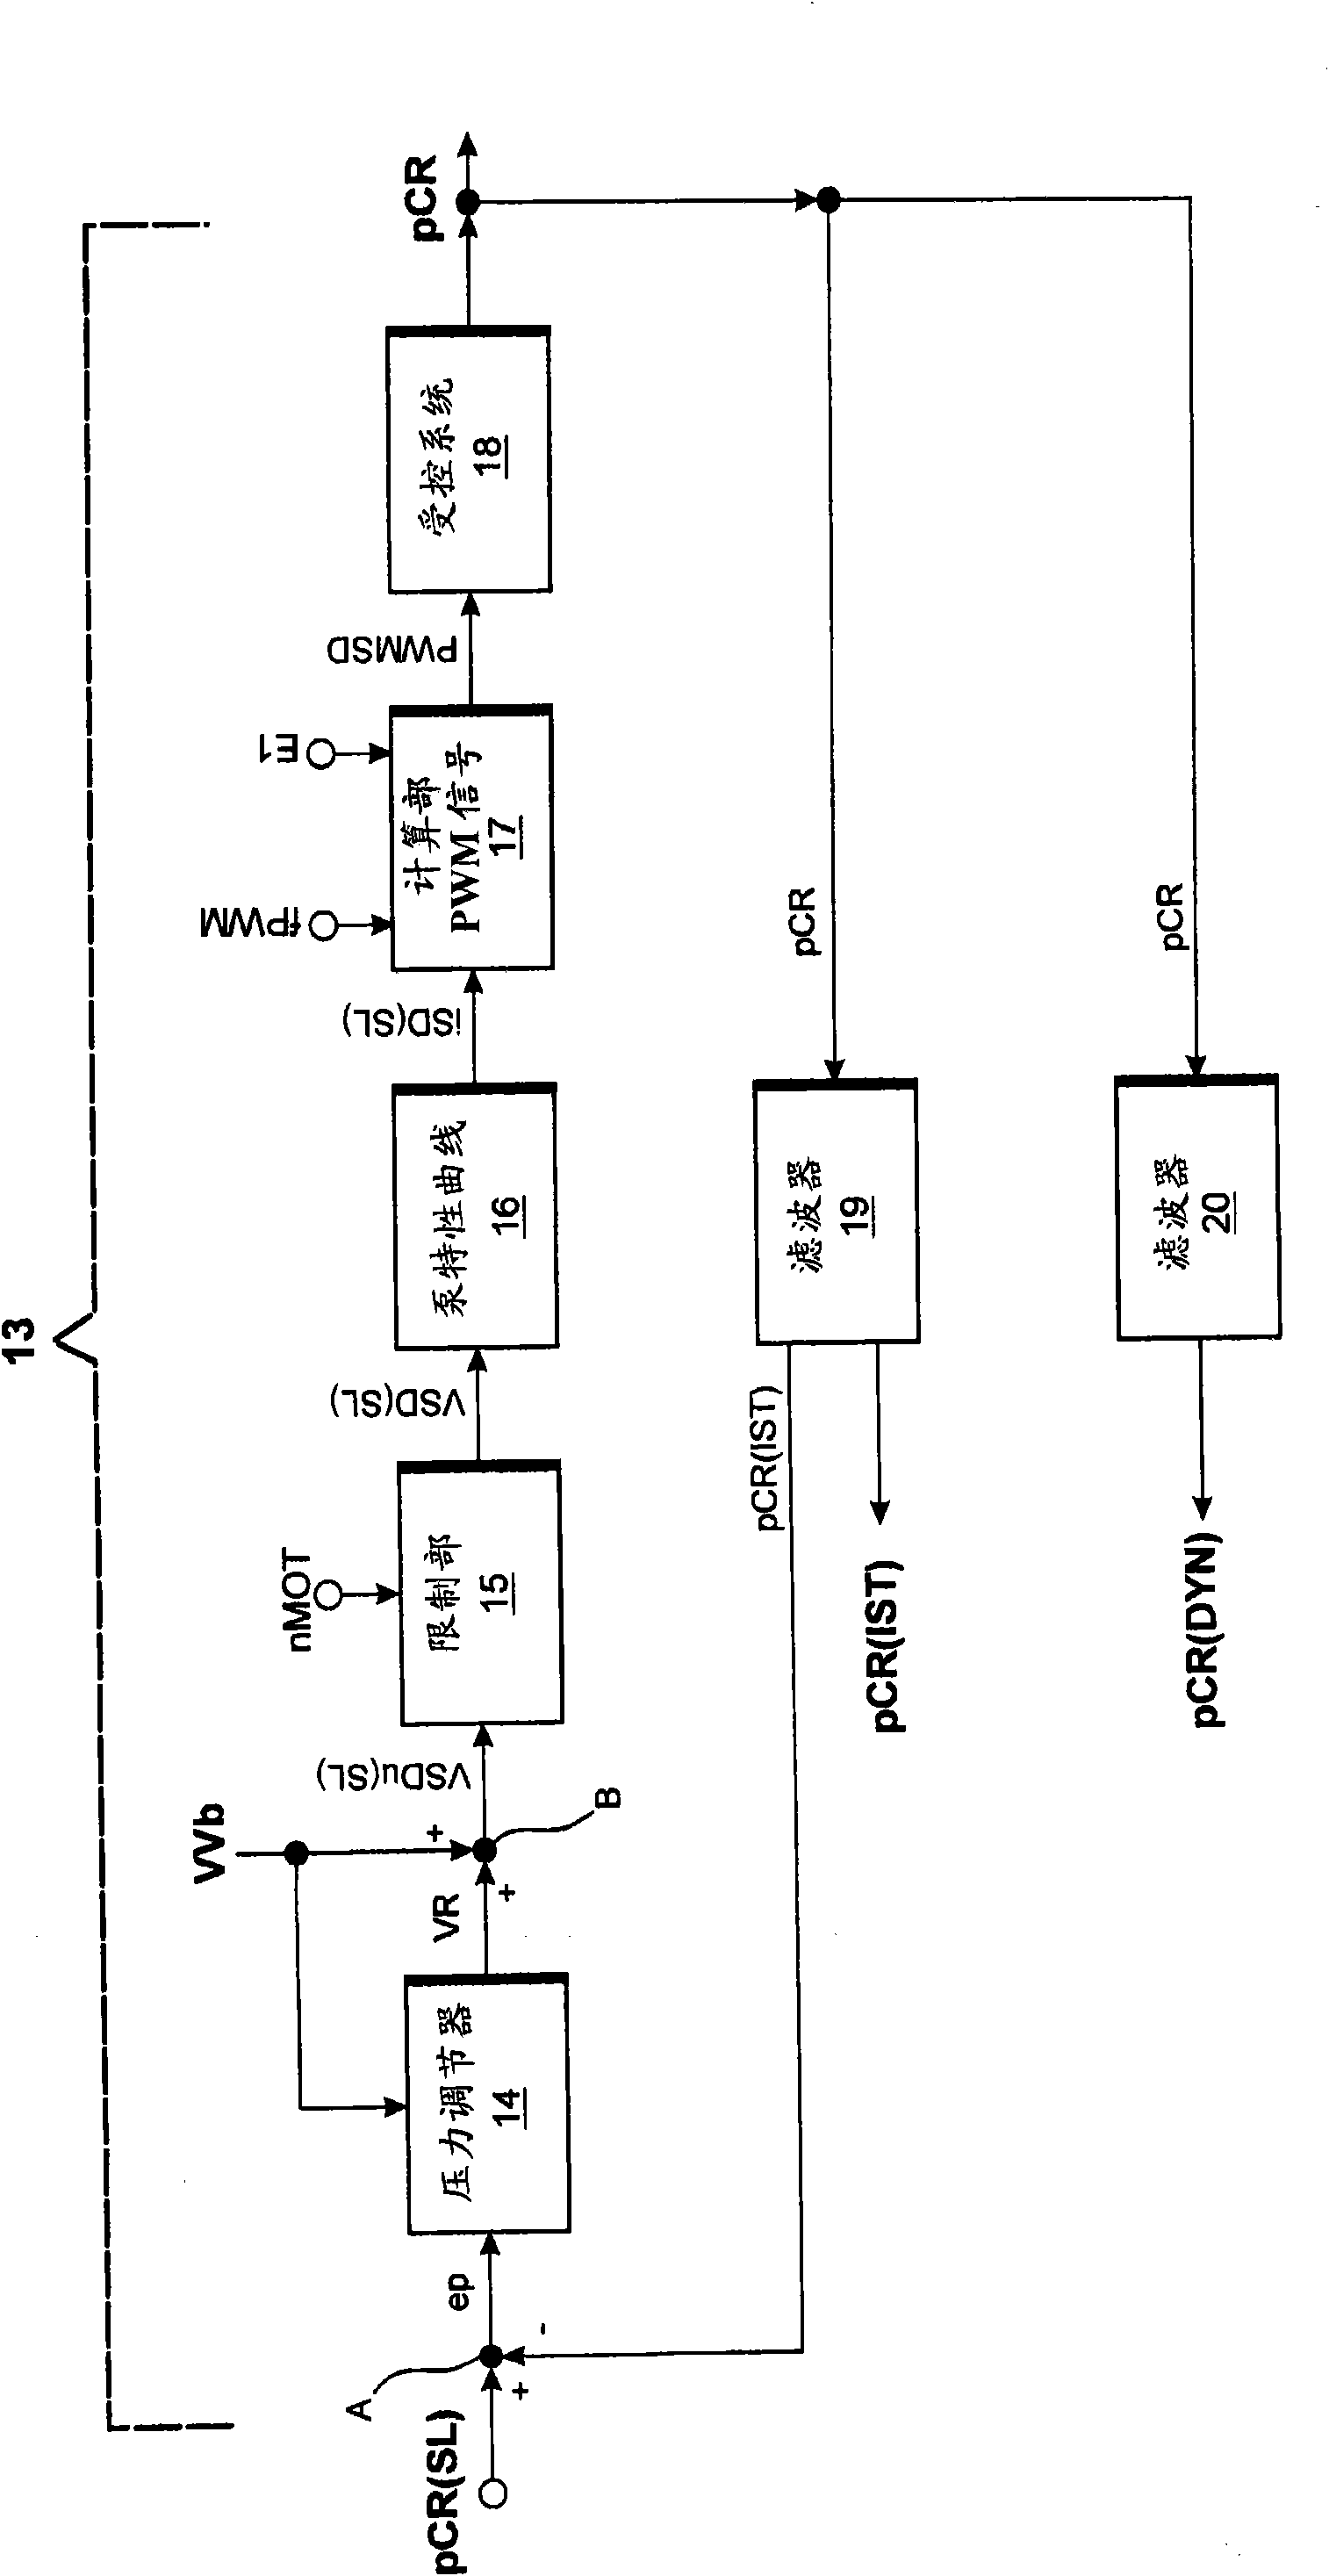 Method for regulating the rail pressure in a common rail injection system of an internal combustion engine